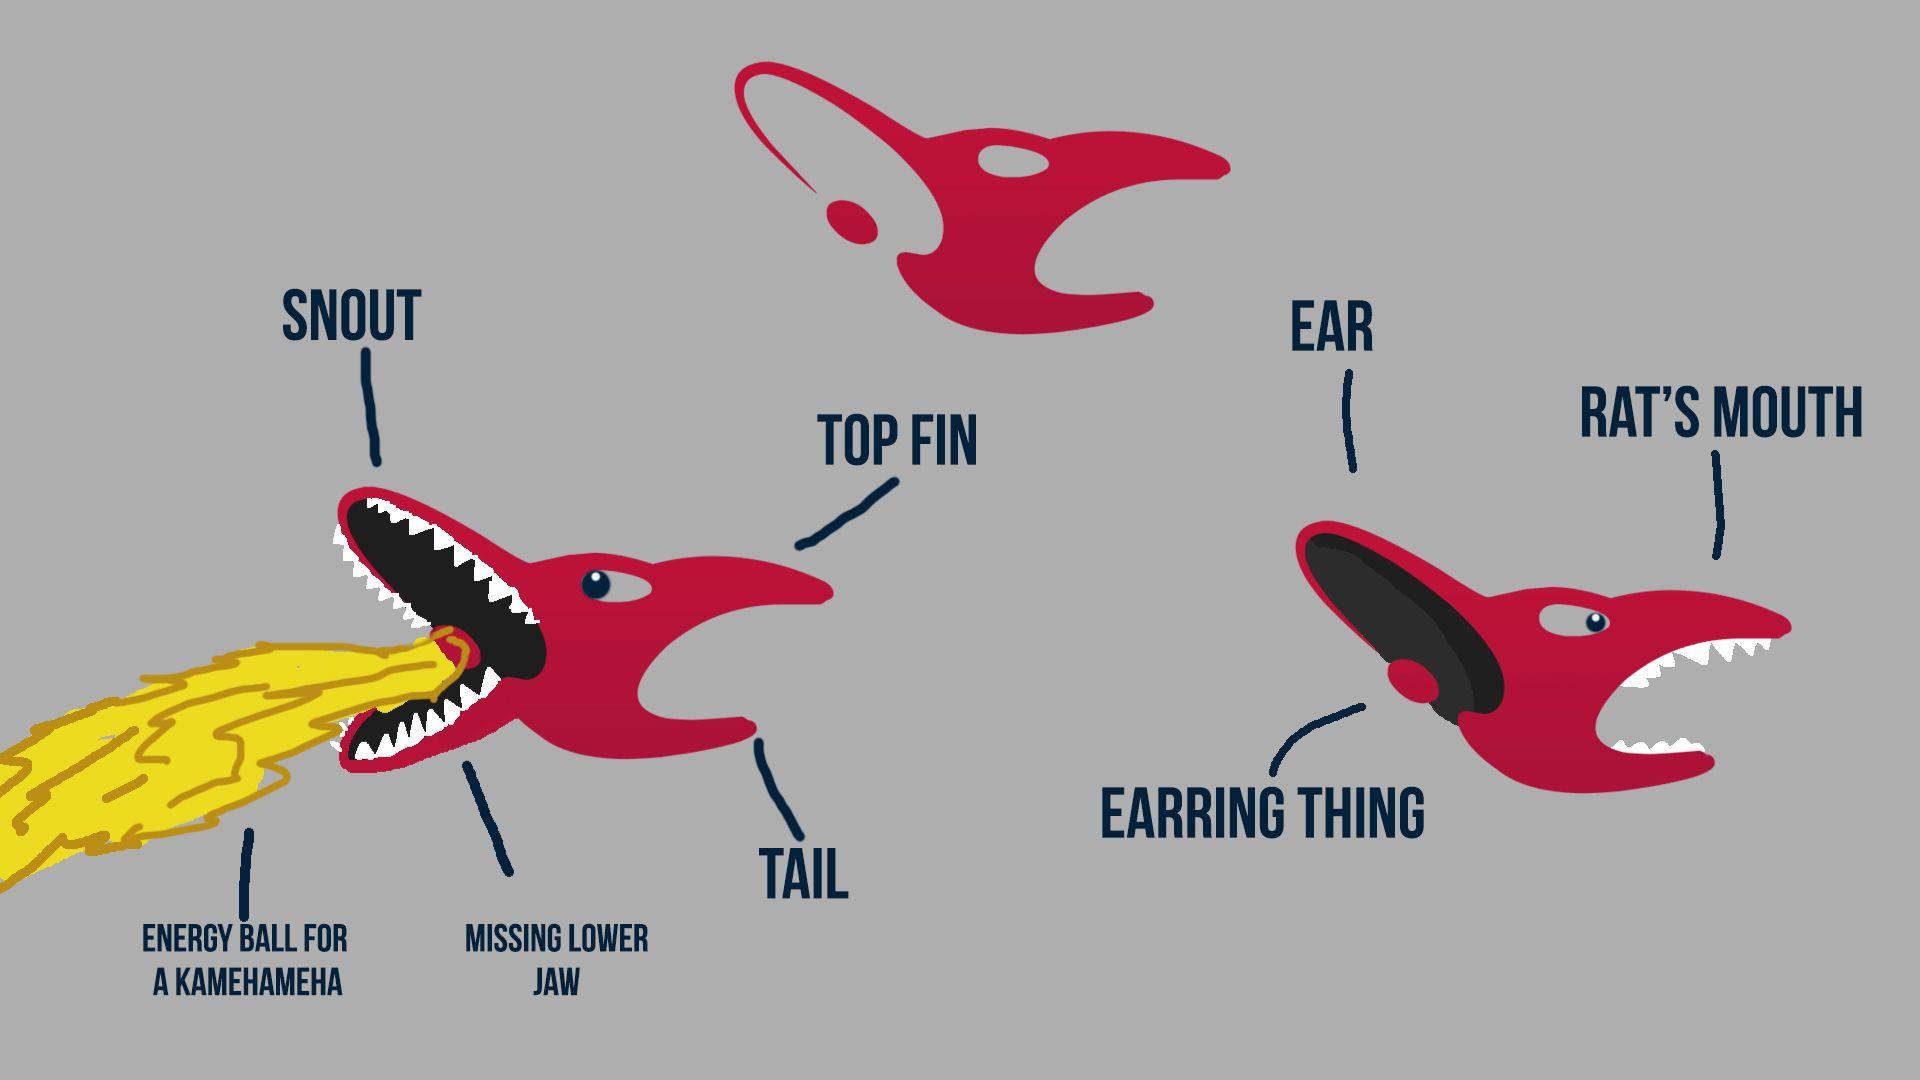 Mousesports Logo - After all this time, I finally realized the Mousesports logo is